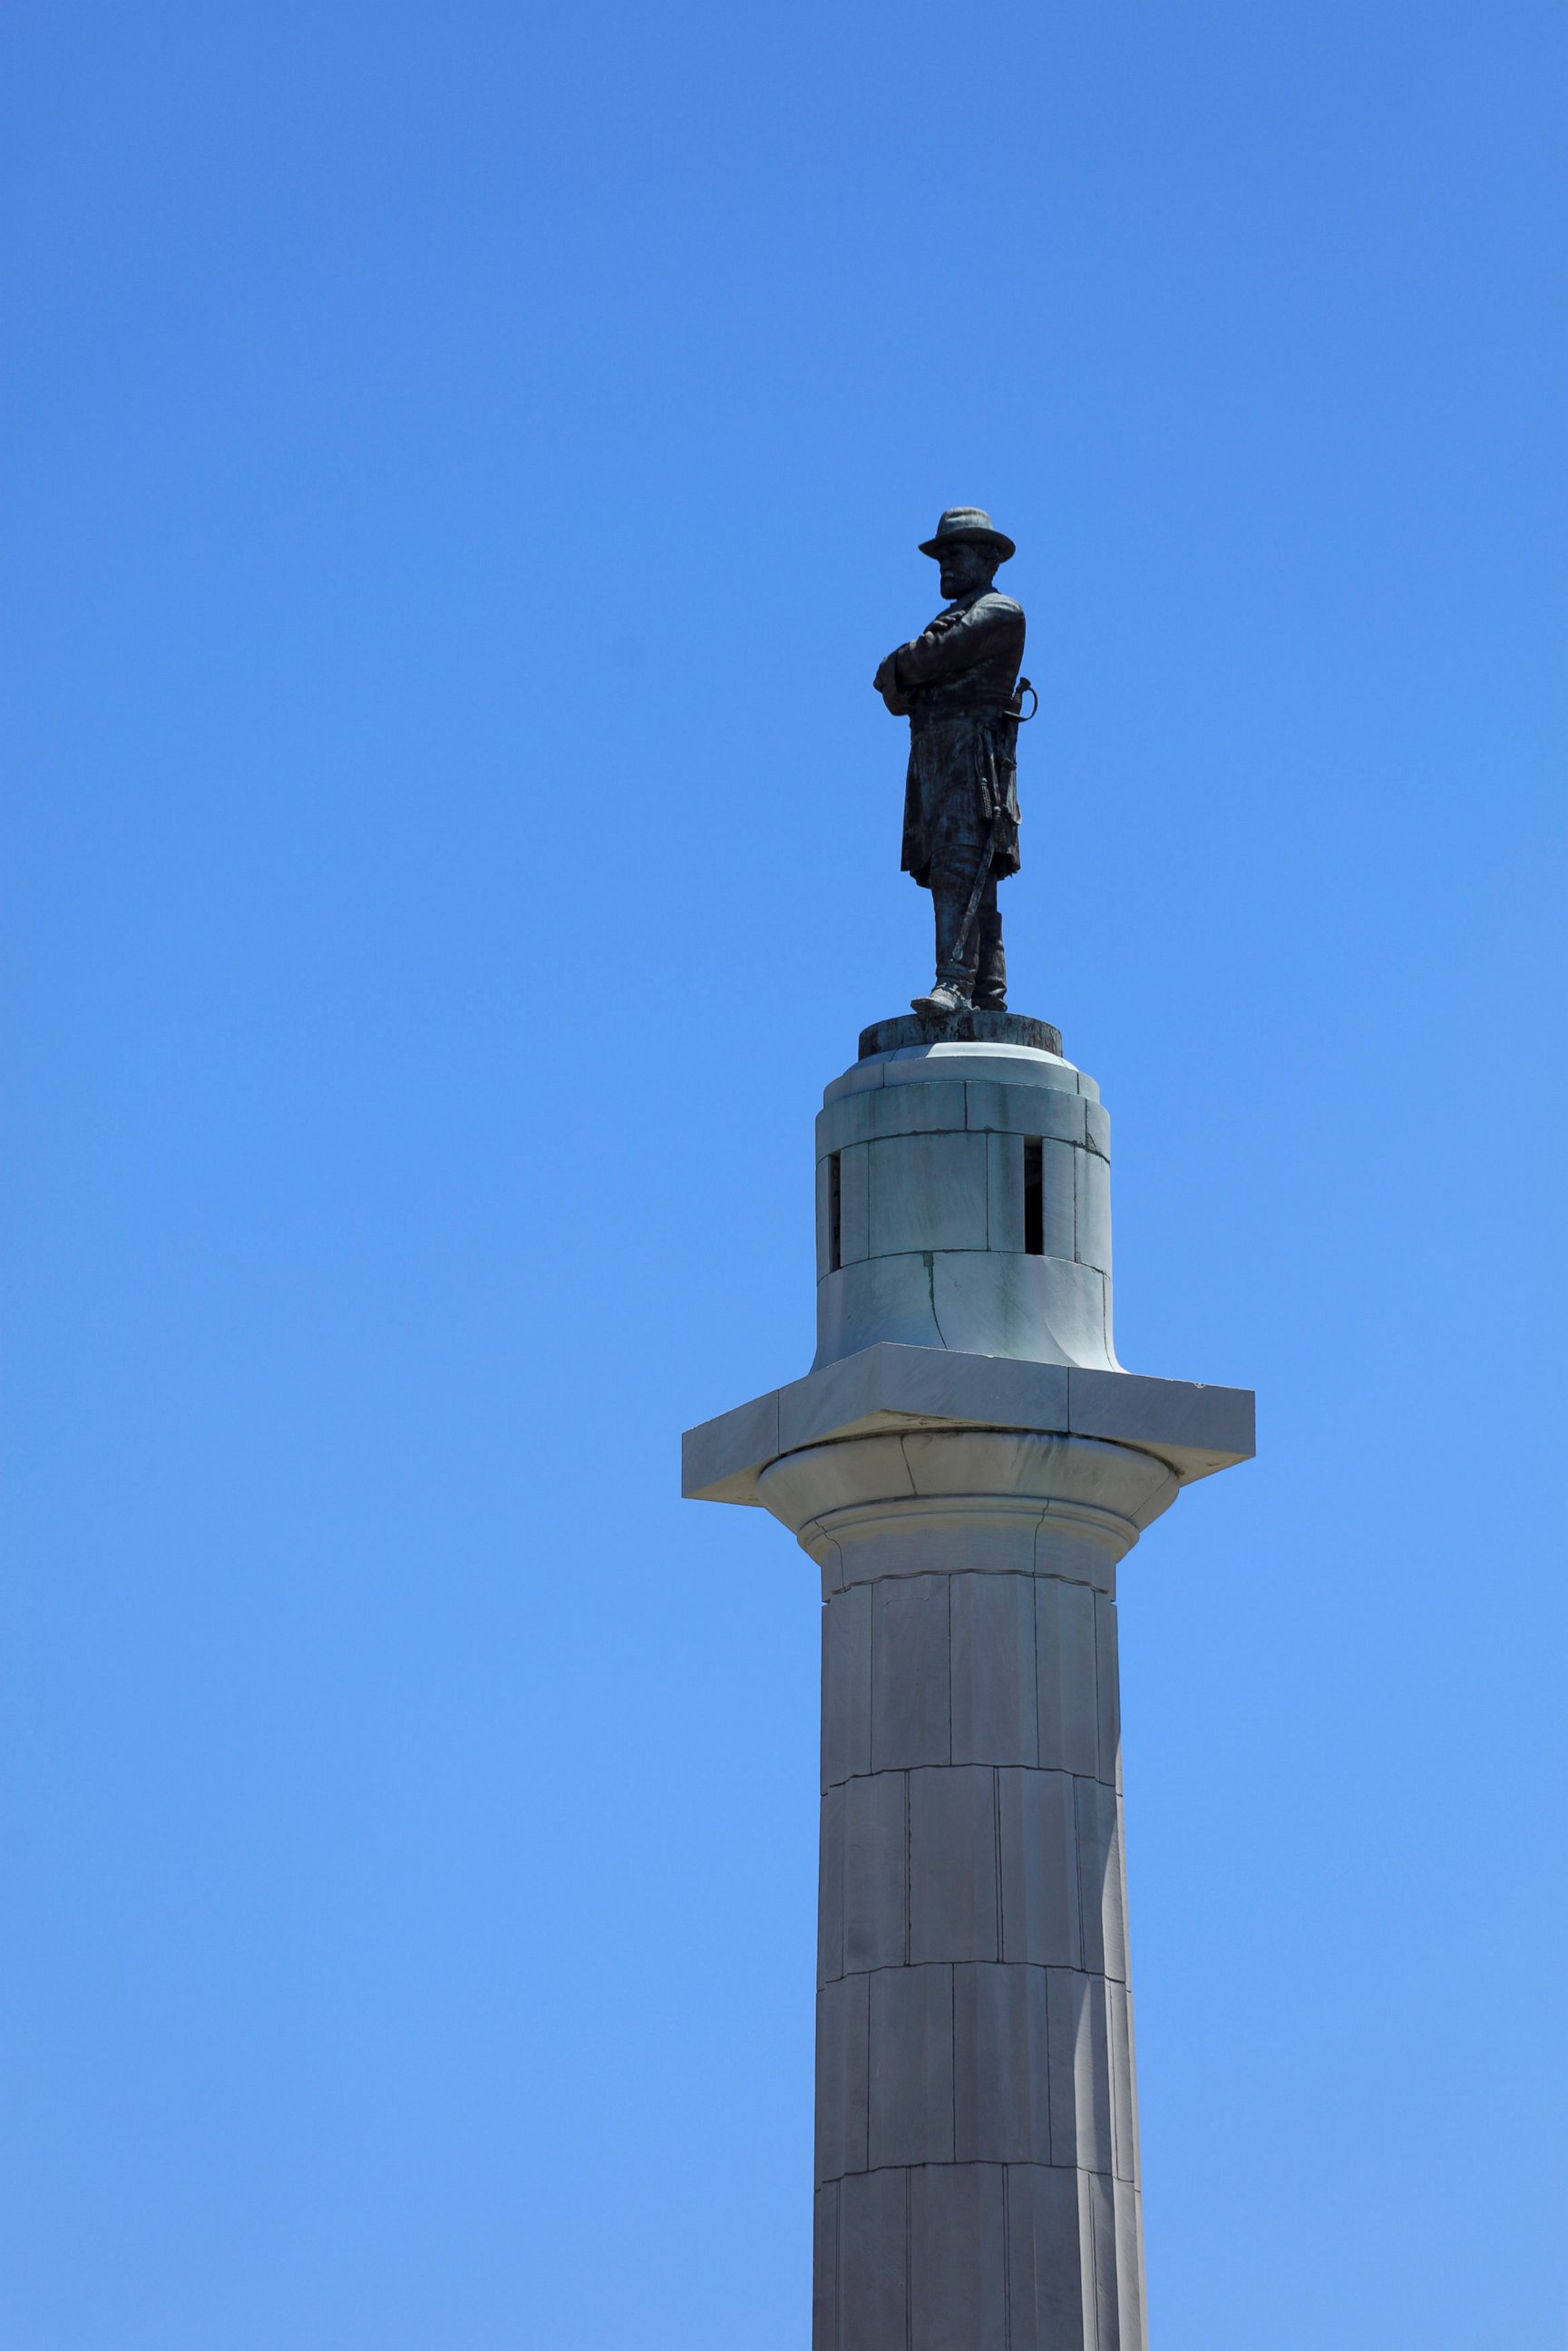 PHOTO: The Robert E. Lee Monument, located in Lee Circle in New Orleans, April 24, 2017.